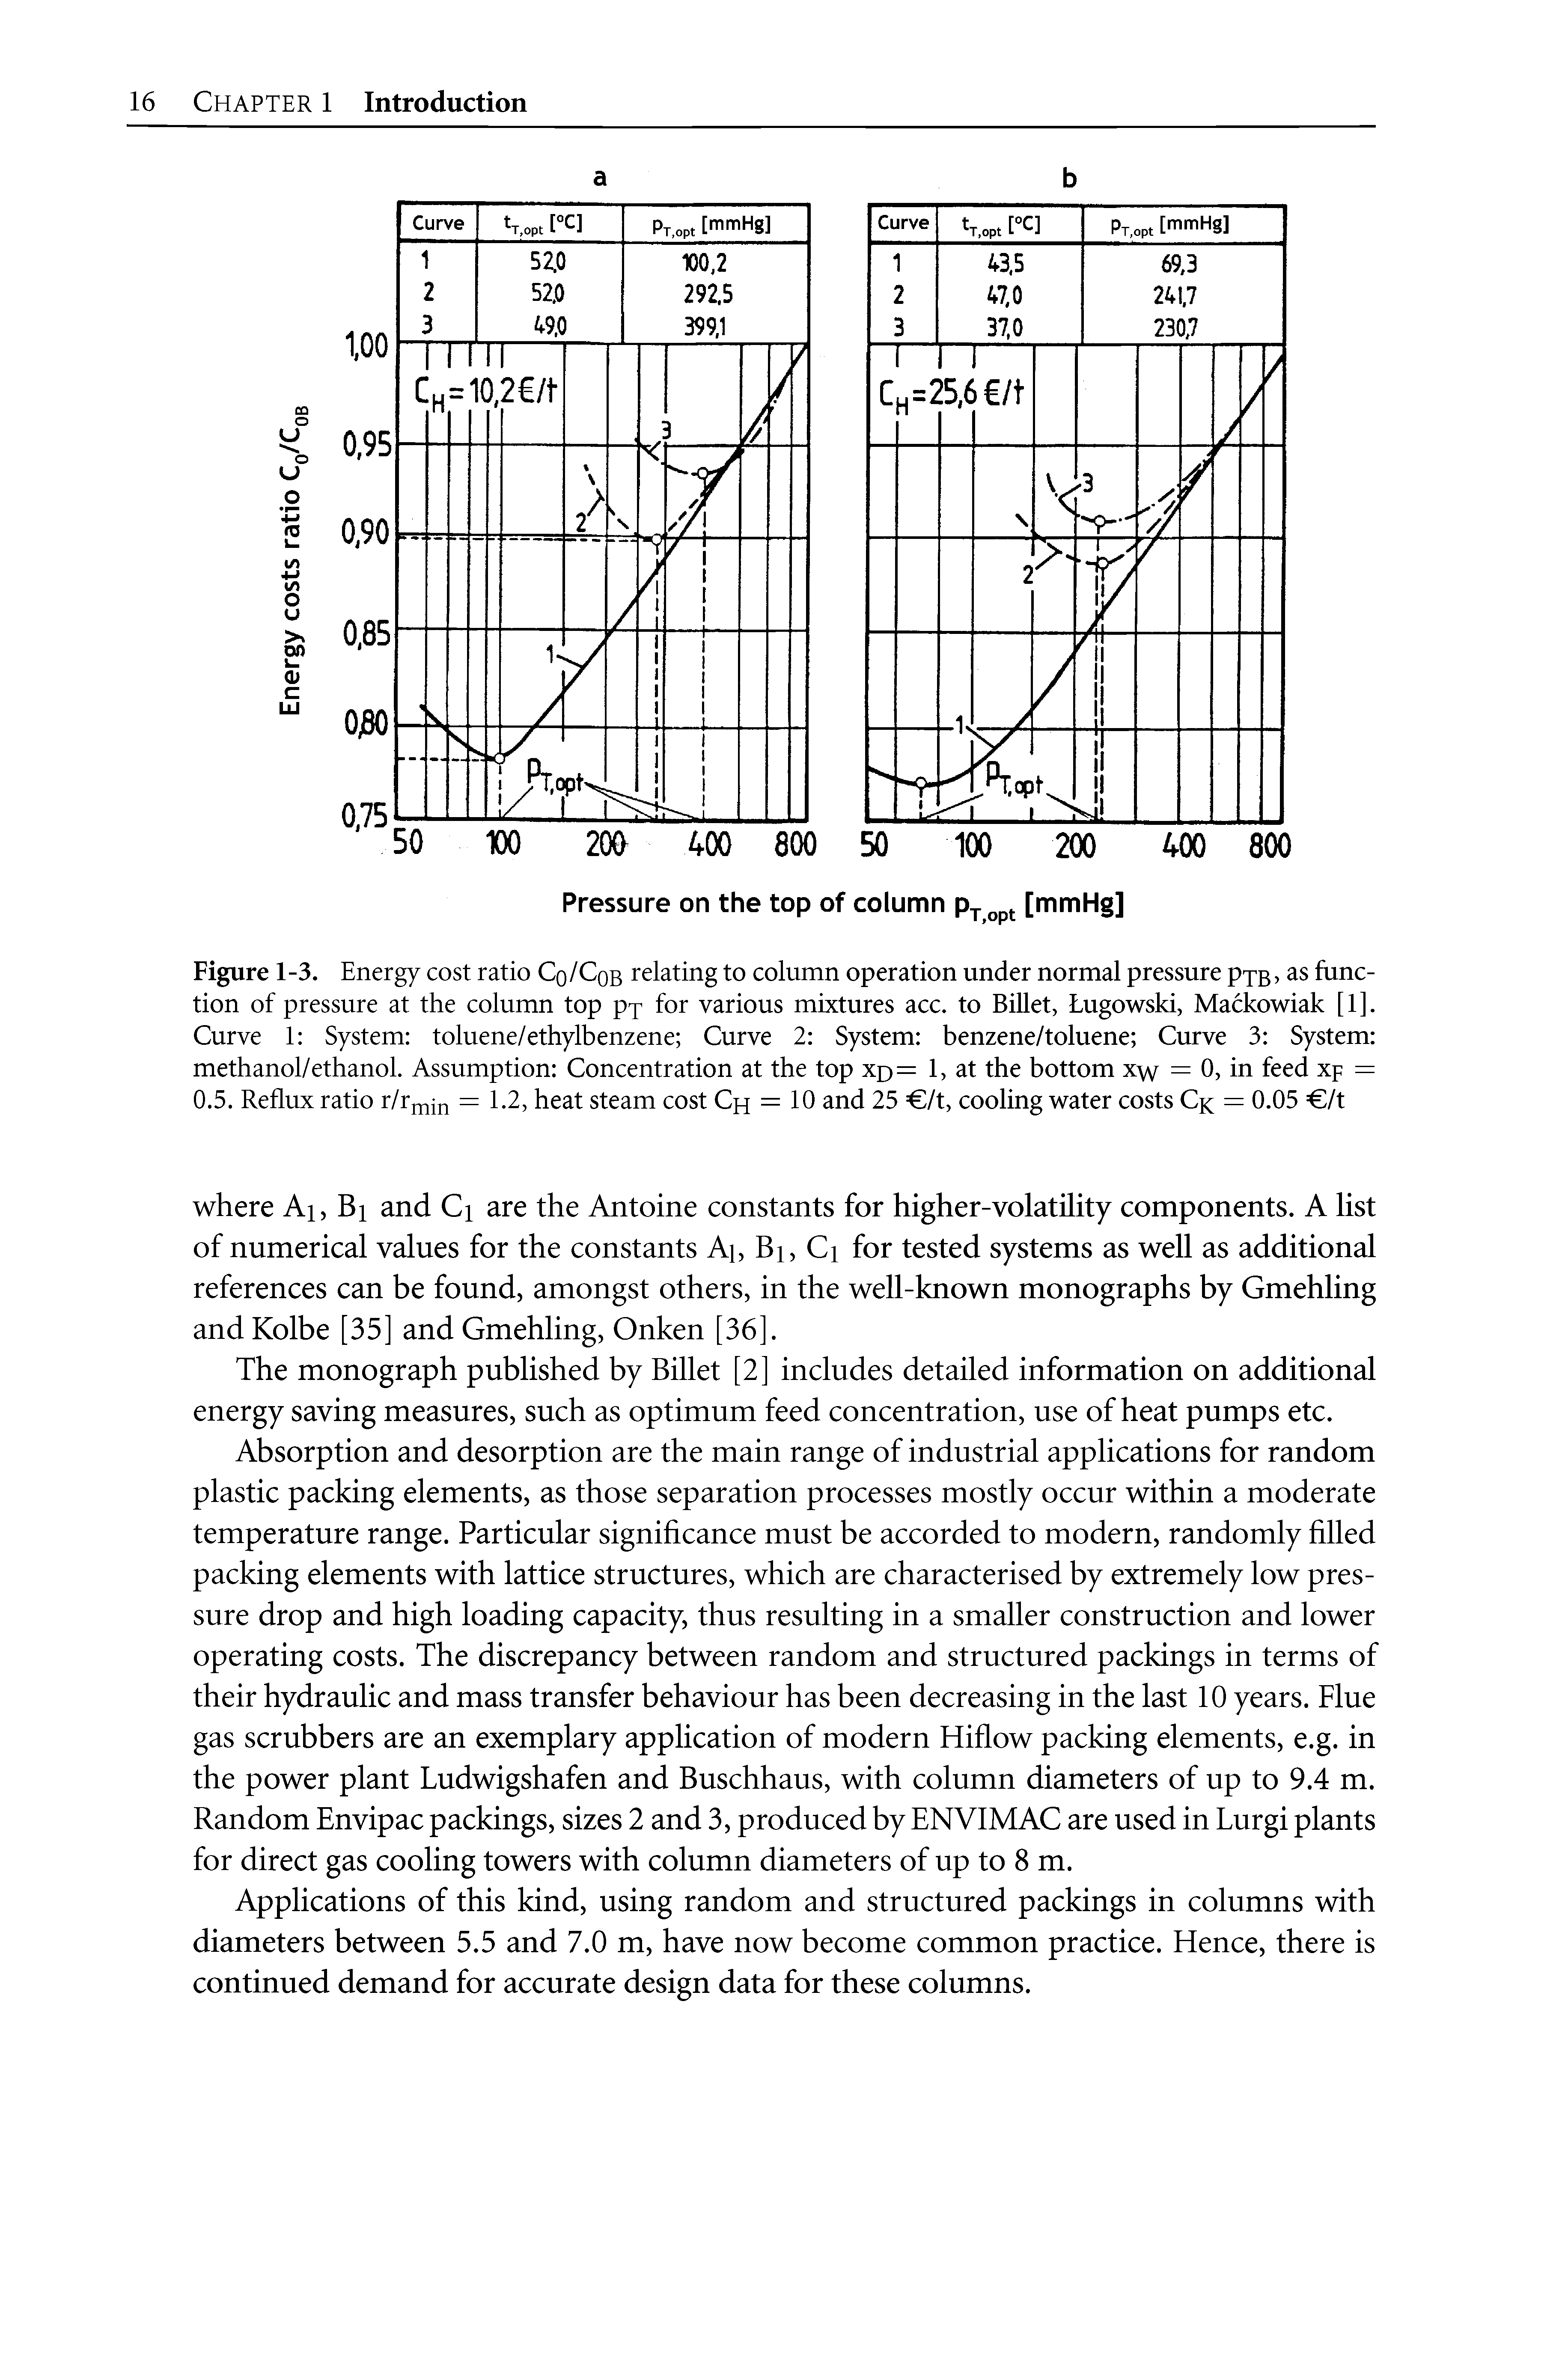 Figure 1-3. Energy cost ratio Cq/Cob relating to column operation under normal pressure pxB> as function of pressure at the column top py for various mixtures acc. to Billet, Lugowski, Mackowiak [1]. Curve 1 System toluene/ethylbenzene Curve 2 System benzene/toluene Curve 3 System methanol/ethanol. Assumption Concentration at the top xd= 1, at the bottom xw = 0, in feed xp = 0.5. Reflux ratio r/r i = heat steam cost Ch = 10 and 25 = /t, cooling water costs Ck = 0.05 = /t...